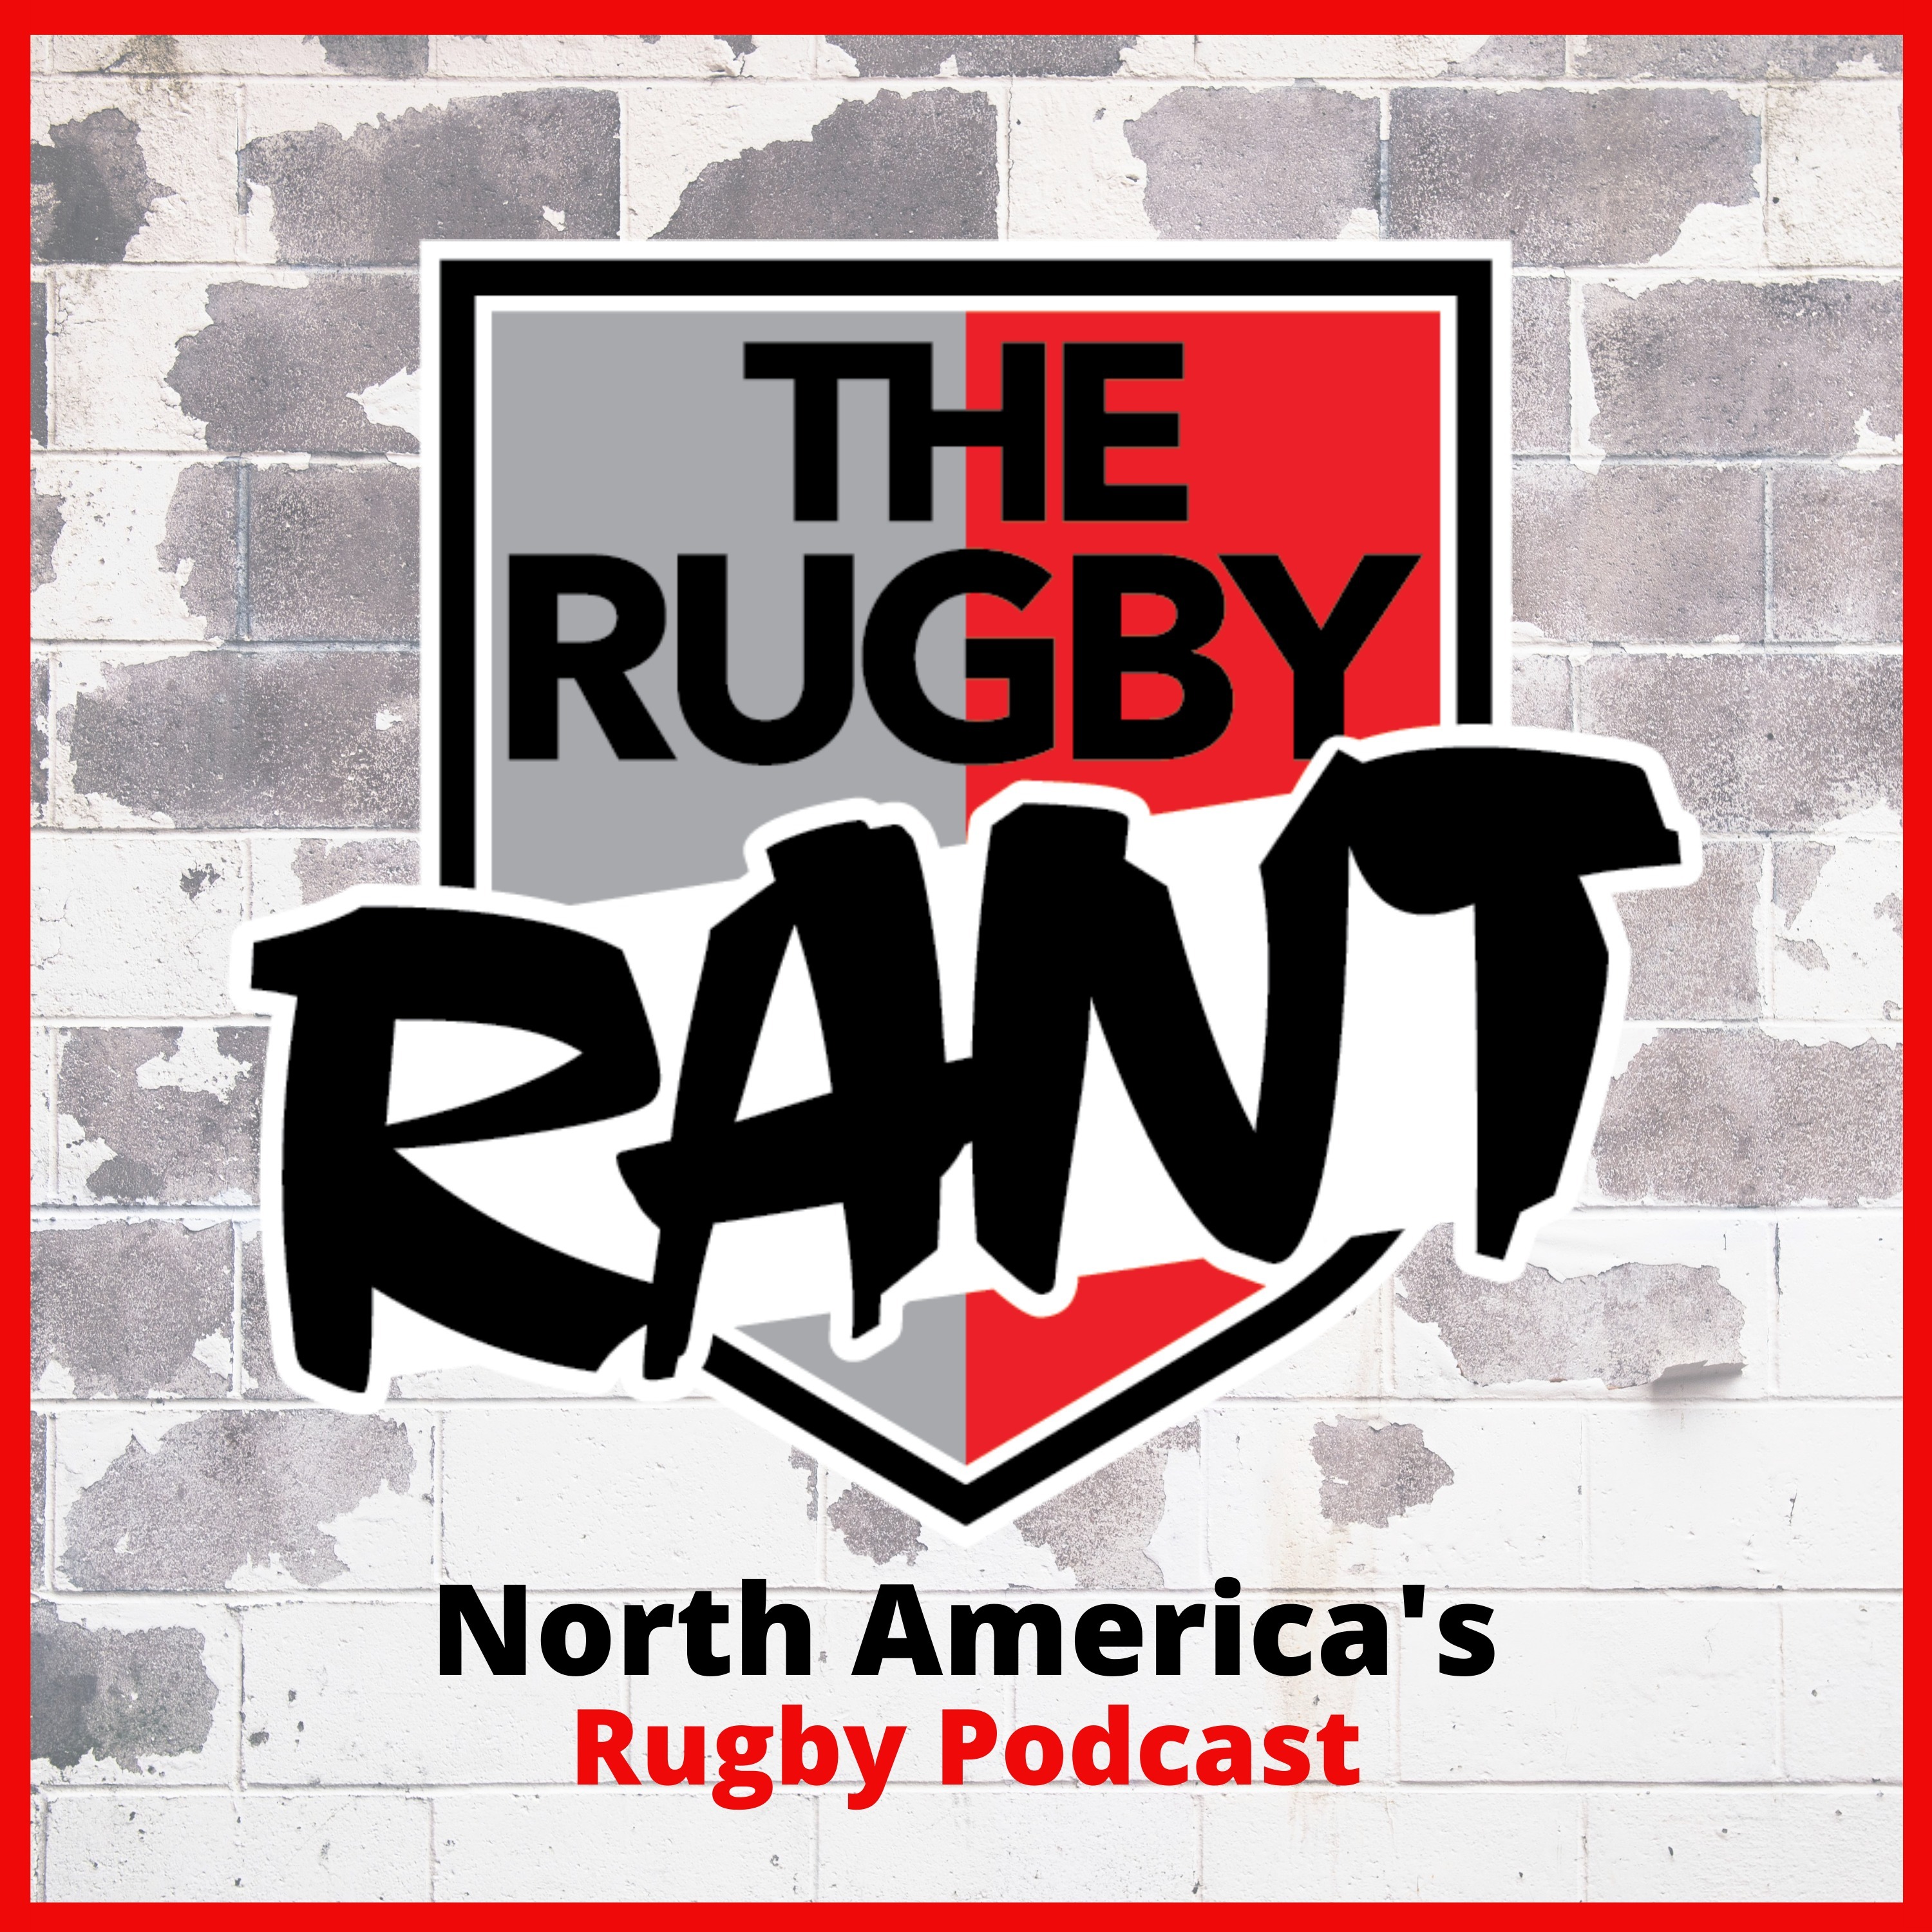 The Rugby Rant - Run, Pass or Kick with George Killebrew